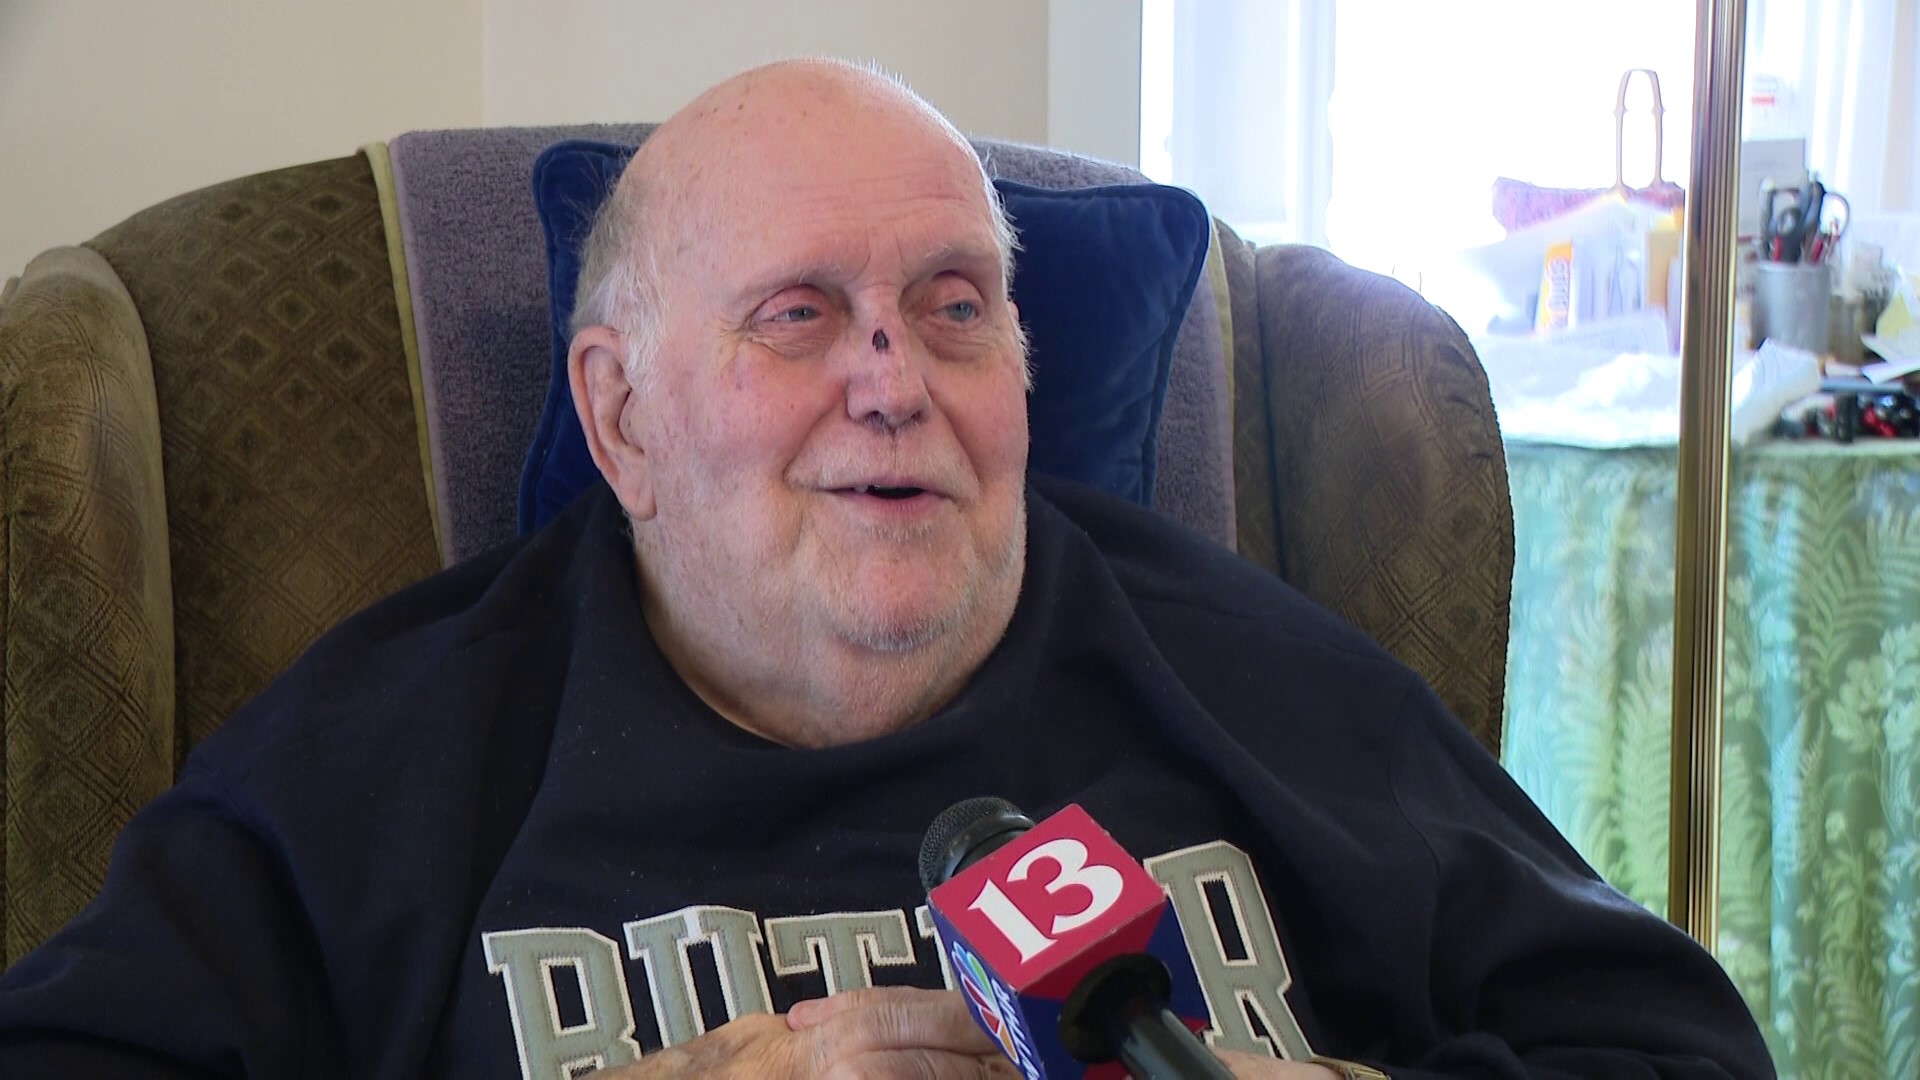 13Sports director Dave Calabro talked with Bob Hammel as the two remembered Coach Bob Knight, who died Wednesday at age 83.